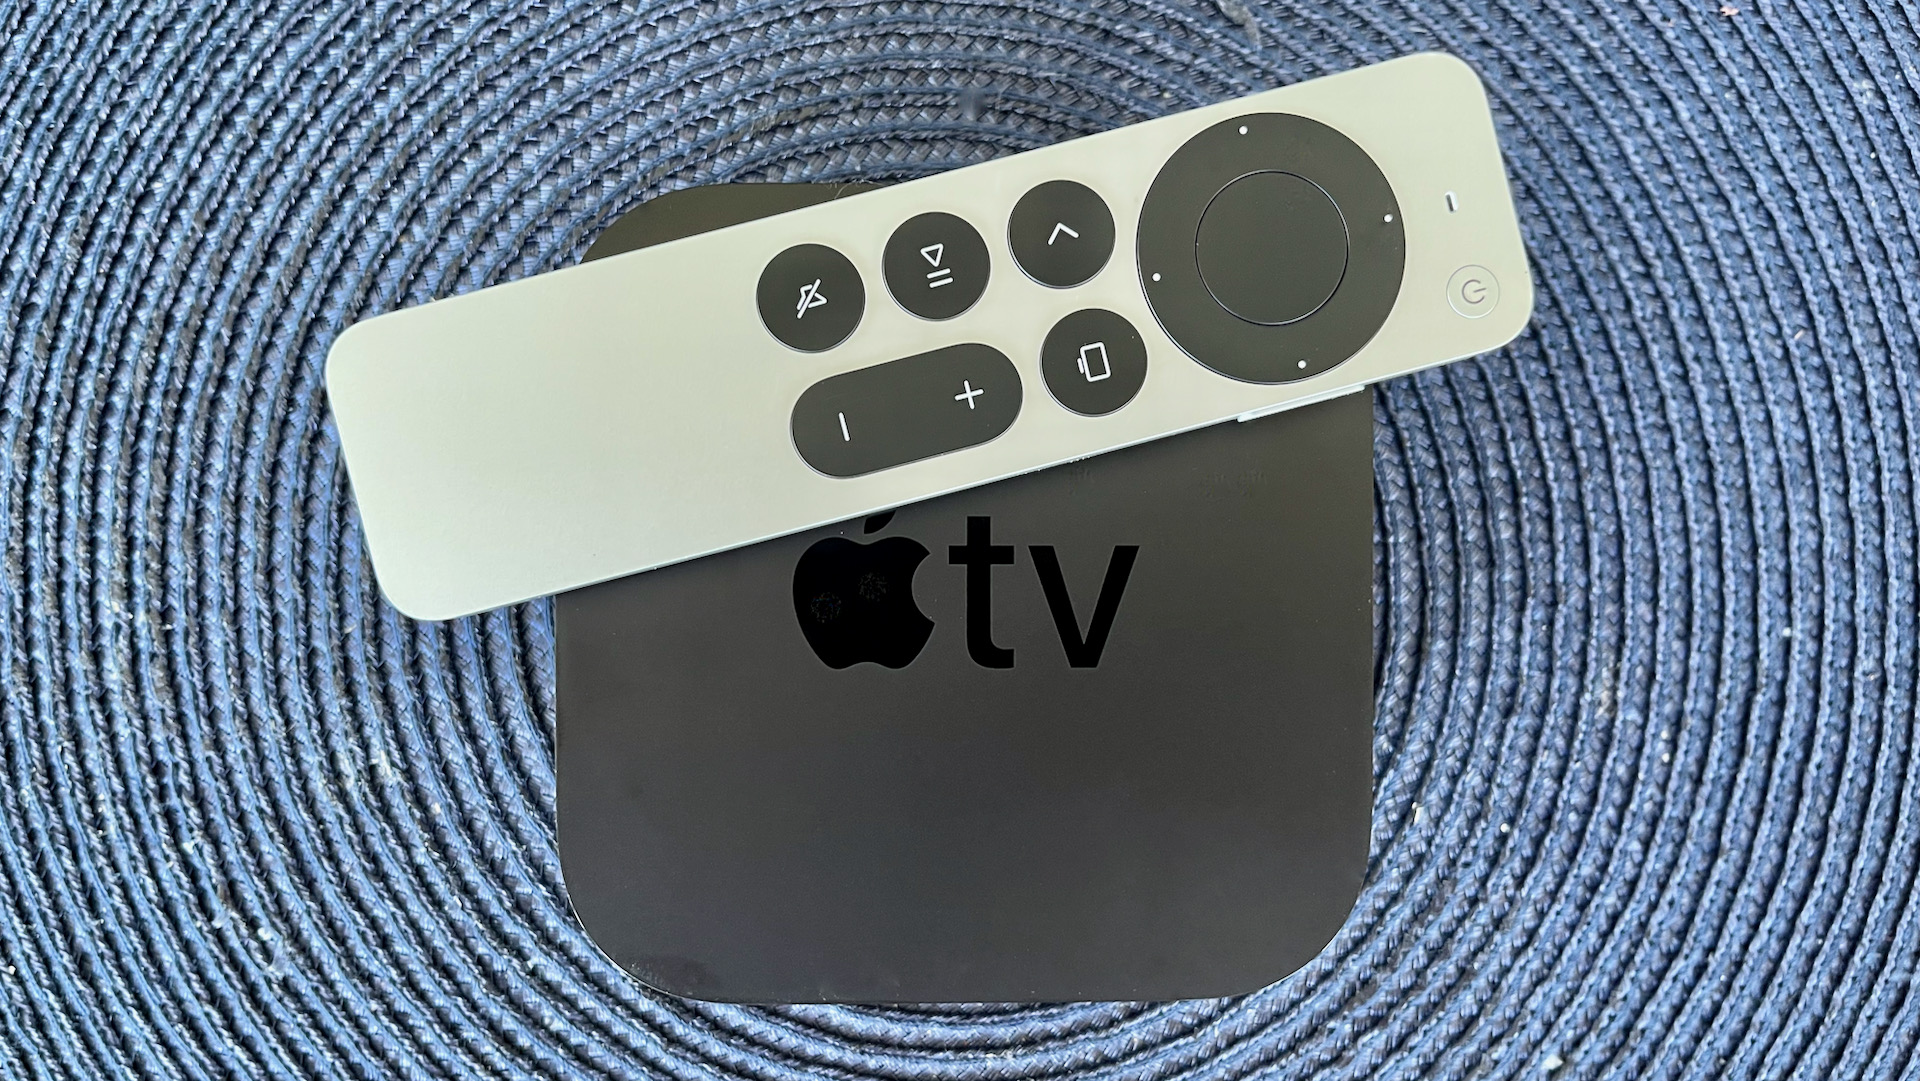 Apple TV 4K and its long rest on it.